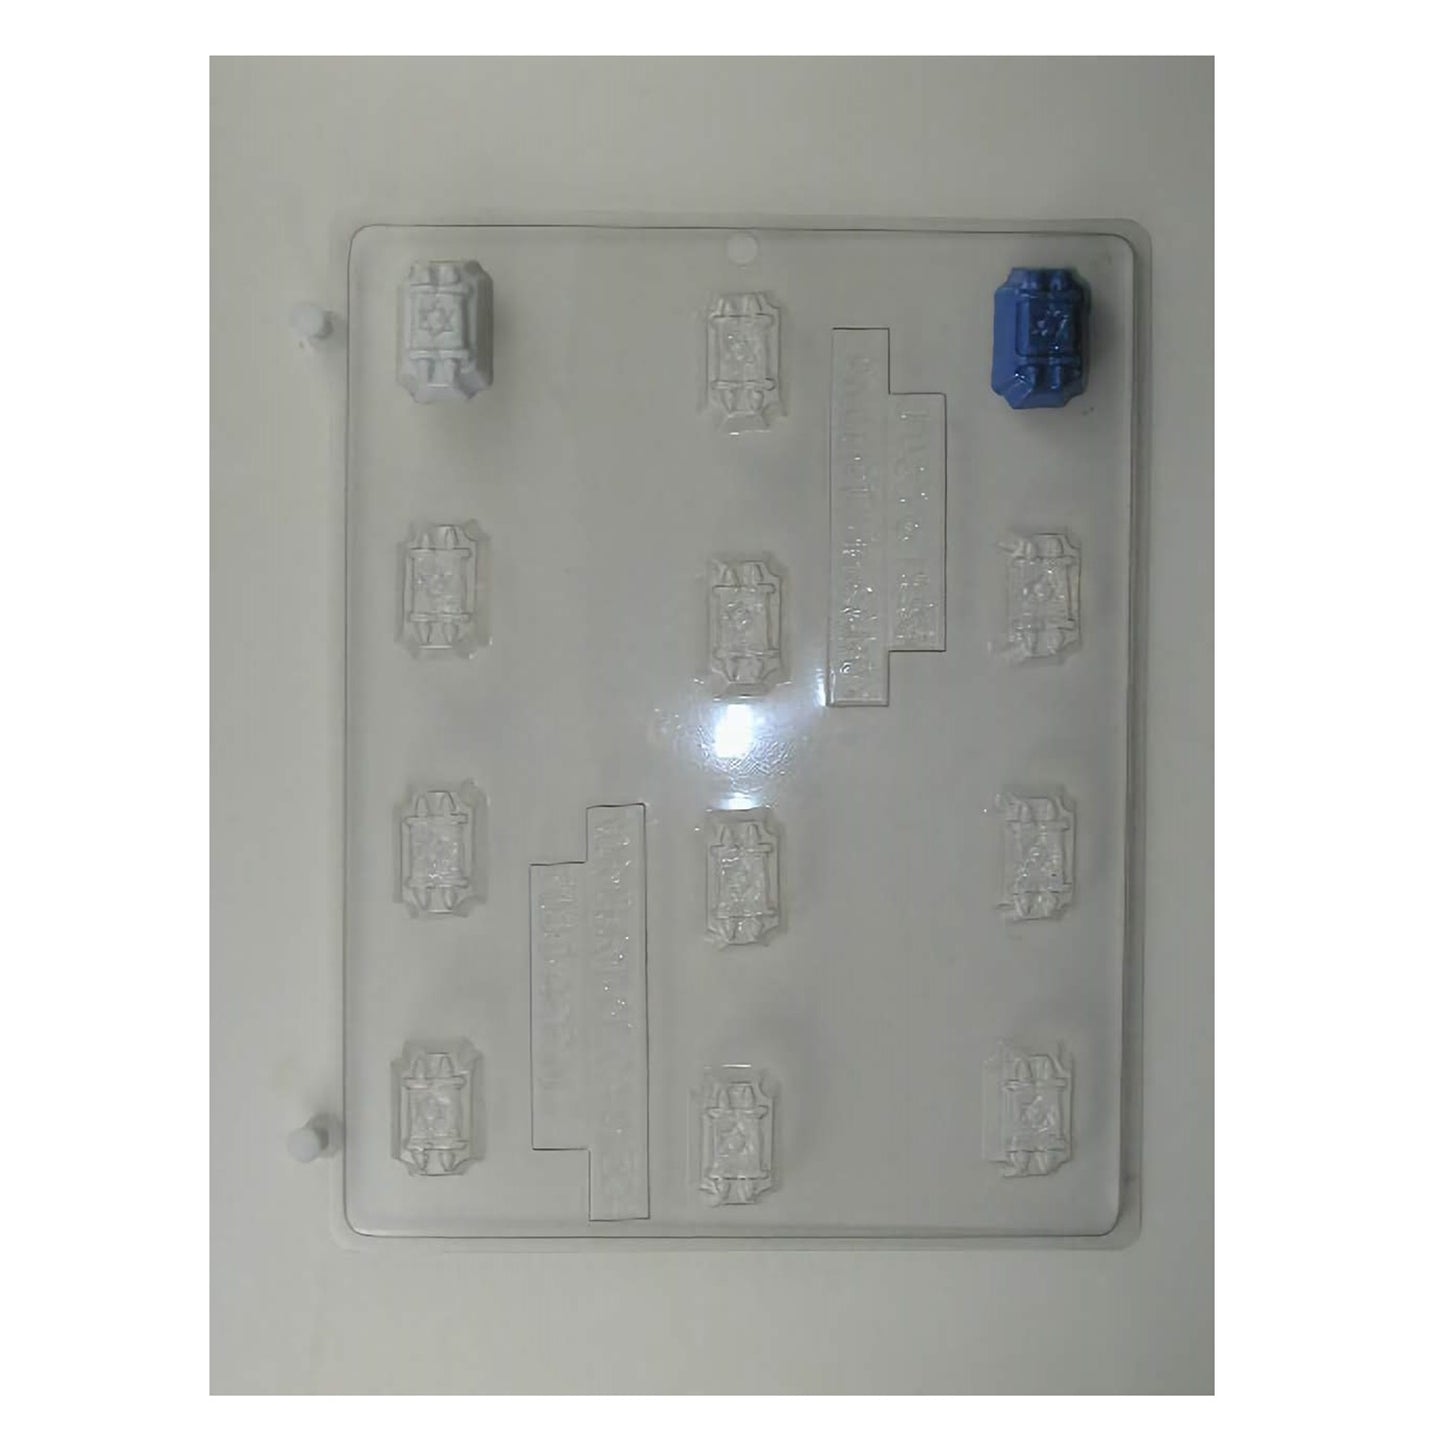 A clear plastic mold for crafting small chocolate scrolls resembling the Torah, complete with etched details representing the text and handles, fitting for religious celebrations, Bar or Bat Mitzvahs